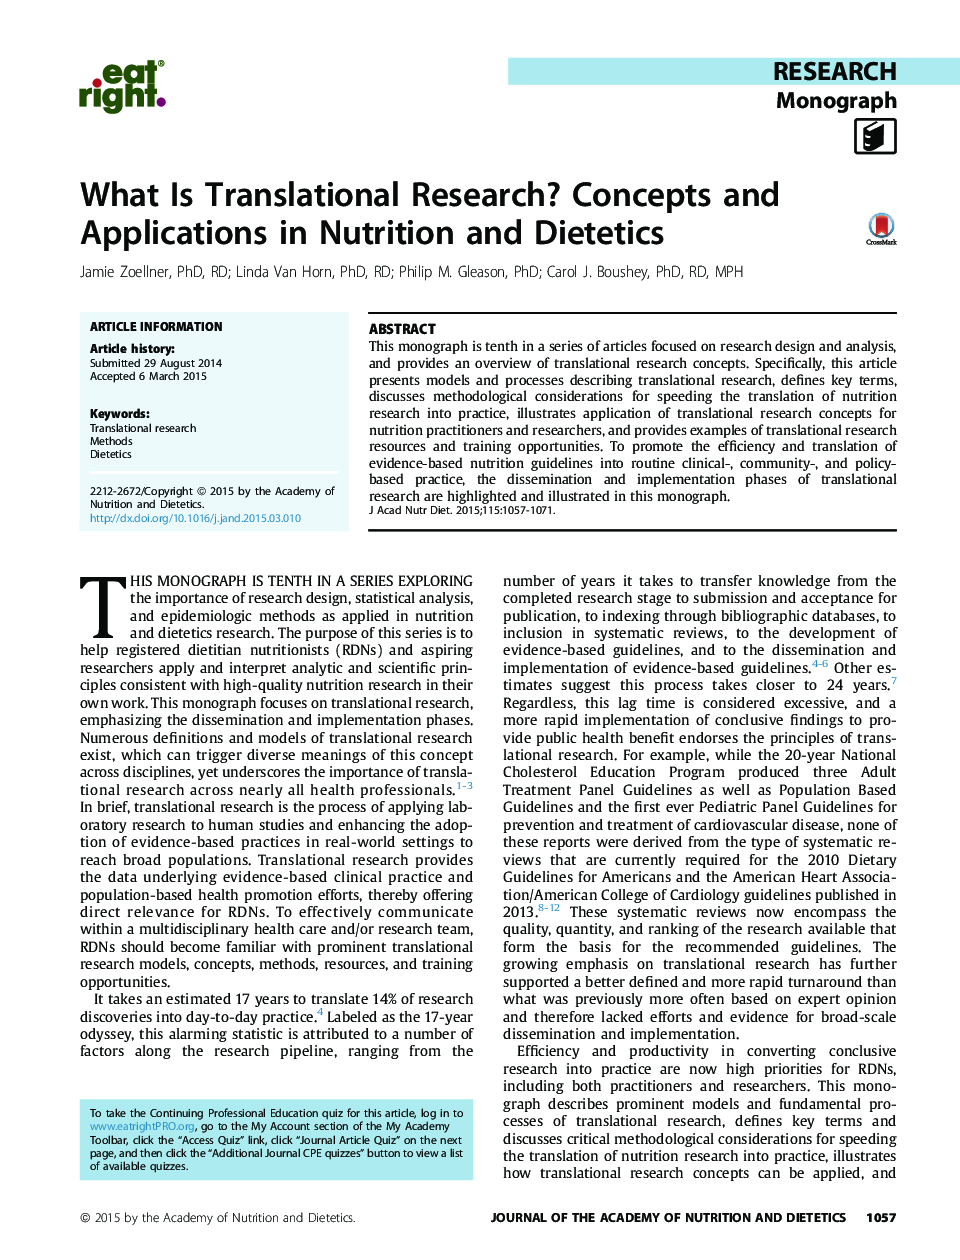 What Is Translational Research? Concepts and Applications in Nutrition and Dietetics 